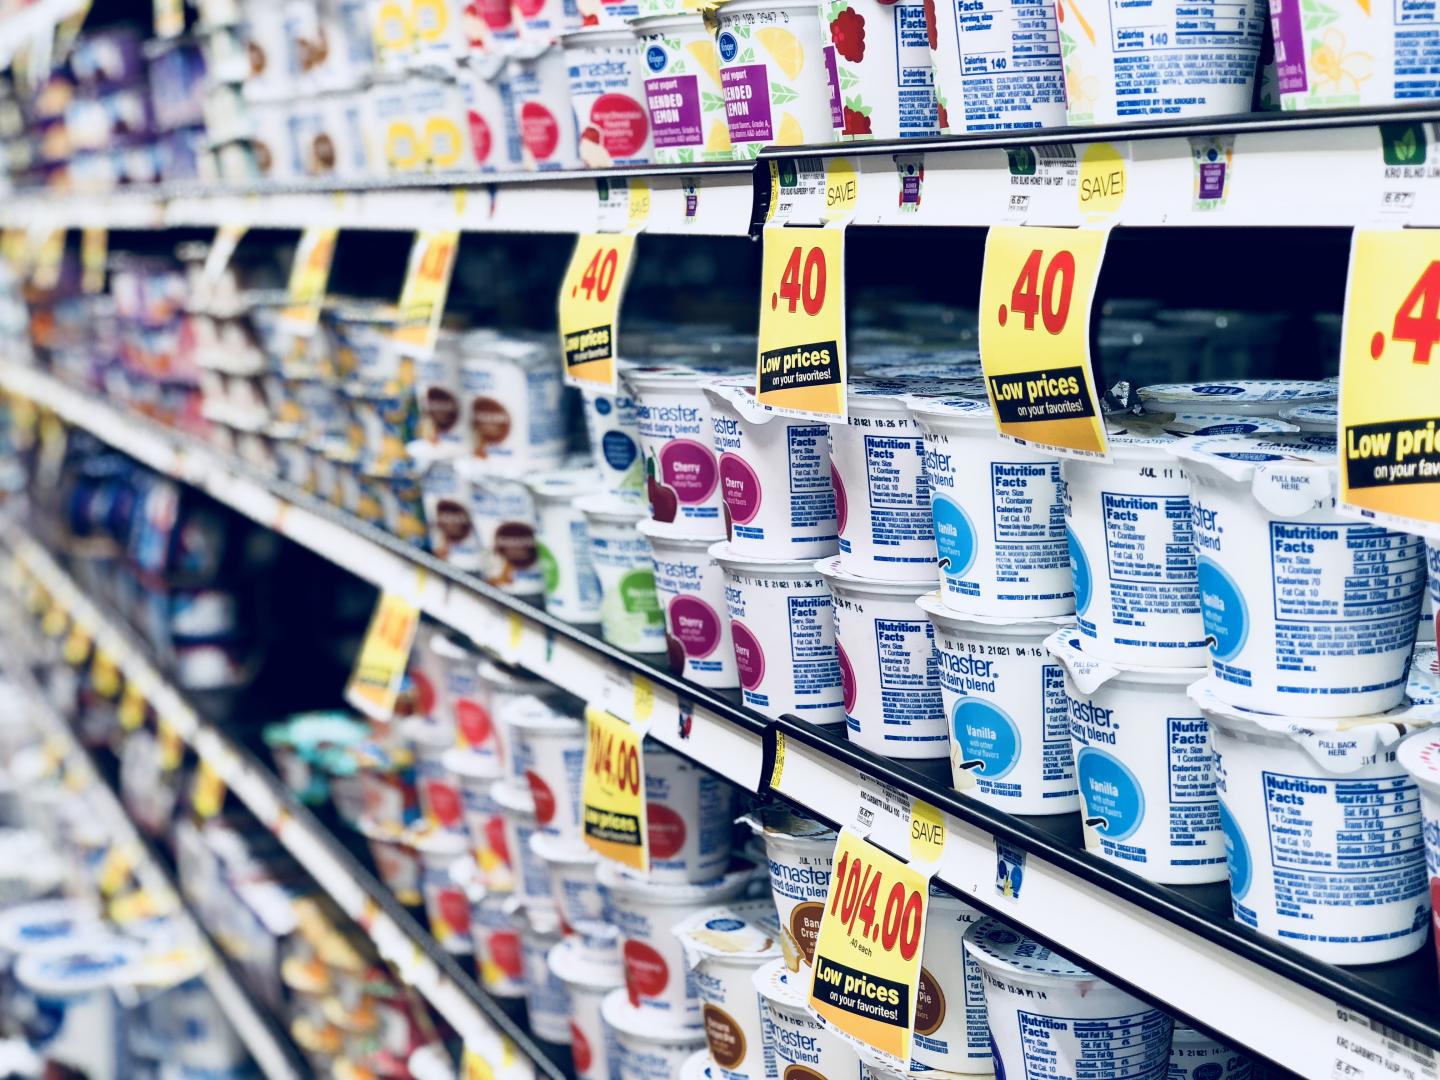 Research Says Skip the Yogurt Aisle and Call a Professional about Your Anxiety